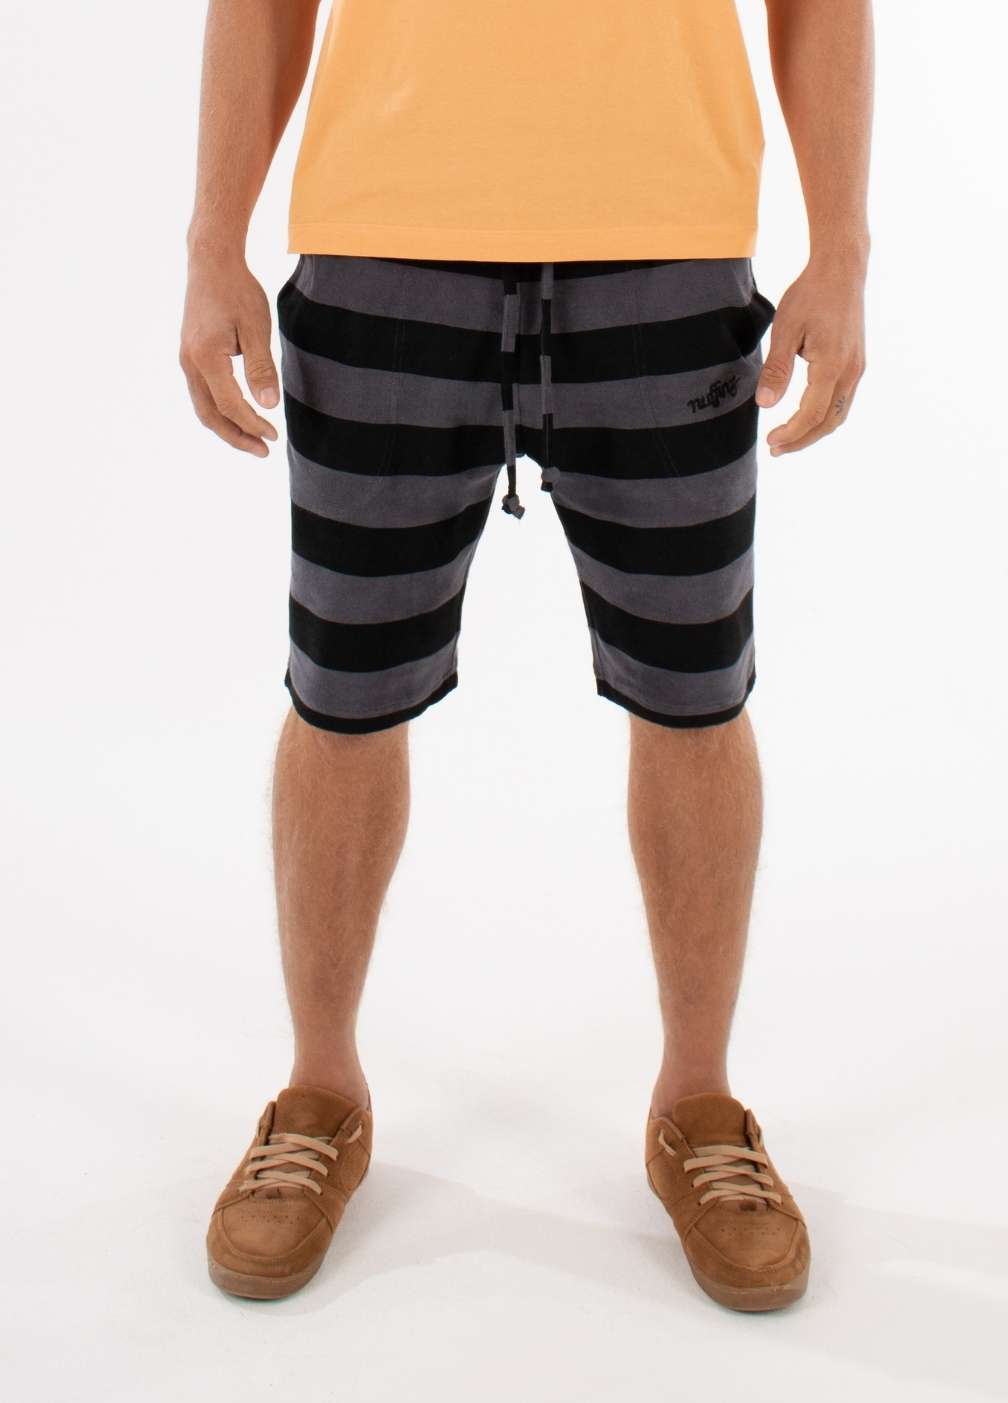 nuffinz striped shorts - EBONY TOWEL SHORTS ST - 100% organic cotton - terry cloth - comfortable shorts for men - closeup front